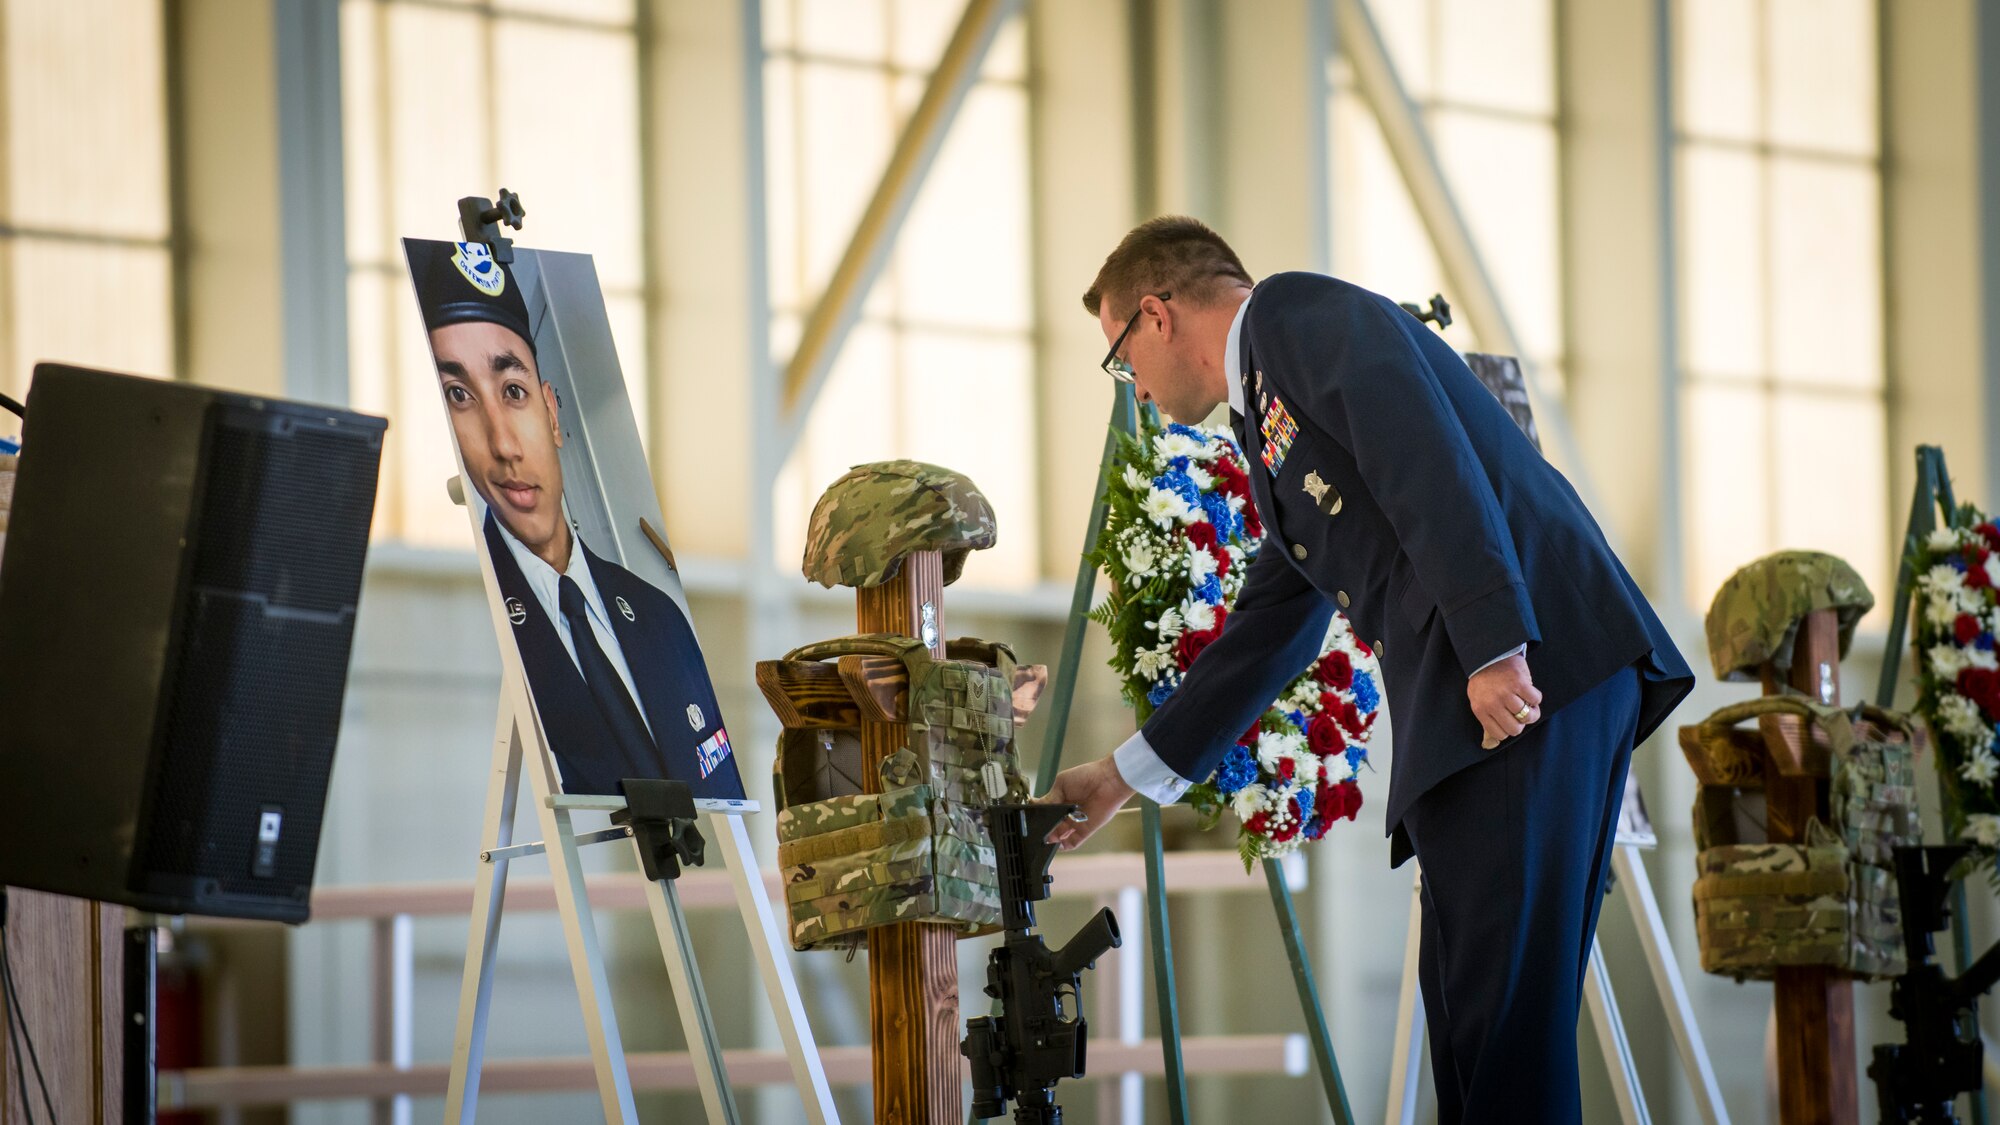 Lt. Col. Joseph A Bincarousky Sr., the 412th Security Forces Squadron Commander, presents a posthumous Air Force Achievement Medal to Staff Sgt. Kylle White, at Edwards Air Force Base, California, Aug. 3. (Air Force photo by Giancarlo Casem)